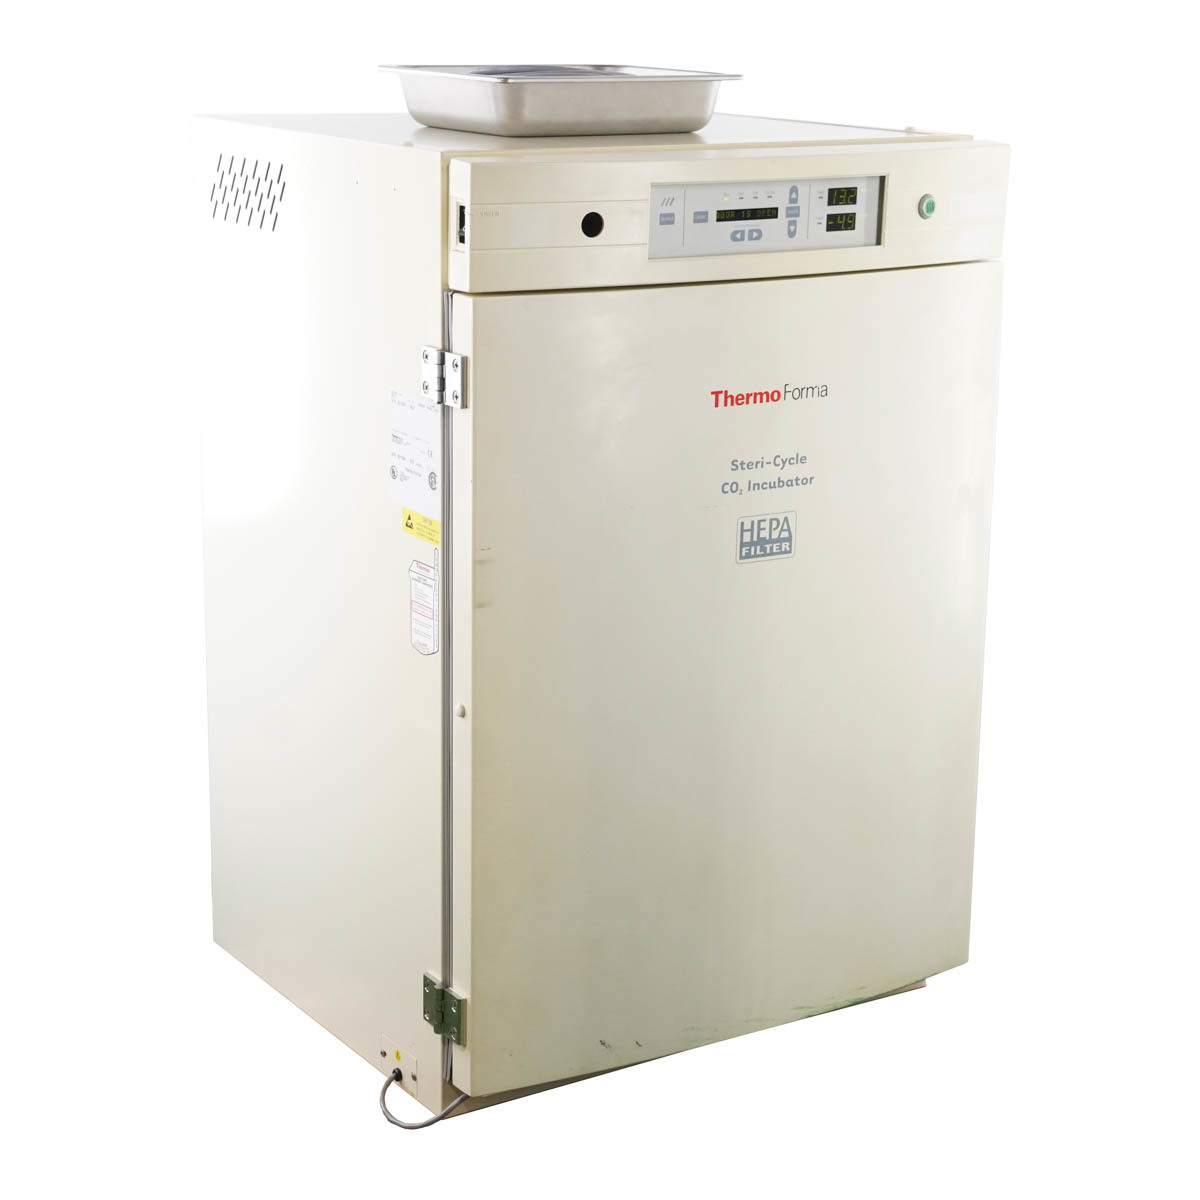 [DW]USED 370 Thermo Forma CO2 Incubator Steri-Cycl...[04371-0001]